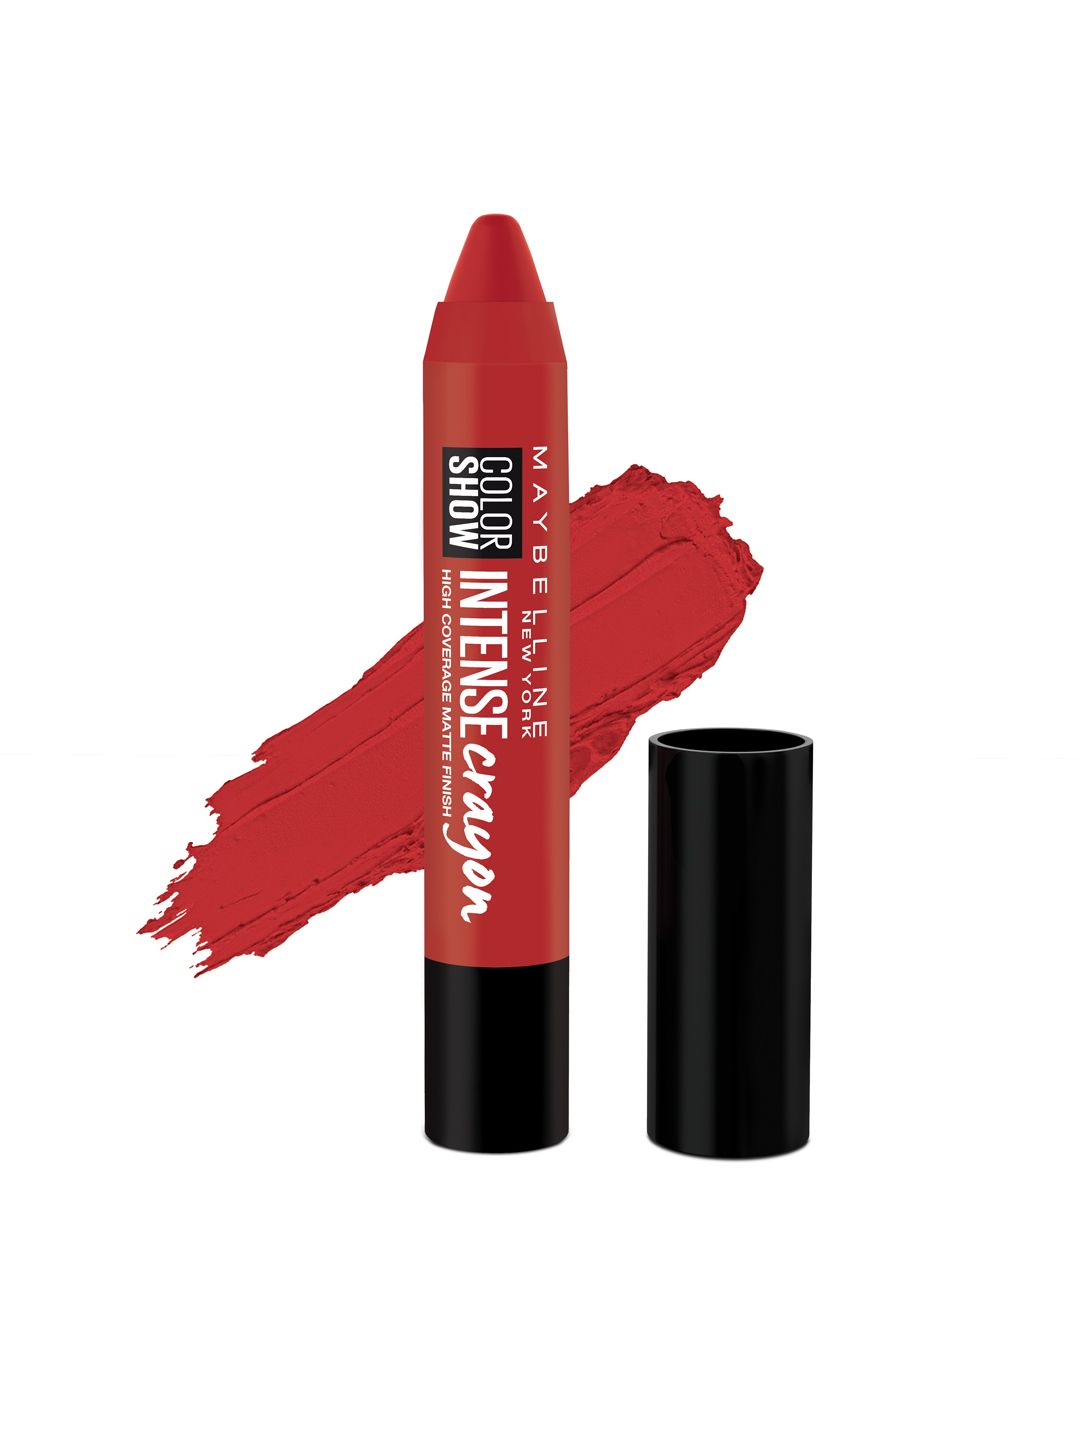 Maybelline Color Show Intense Crayon Lipstick - 308 Deep Coral Price in India